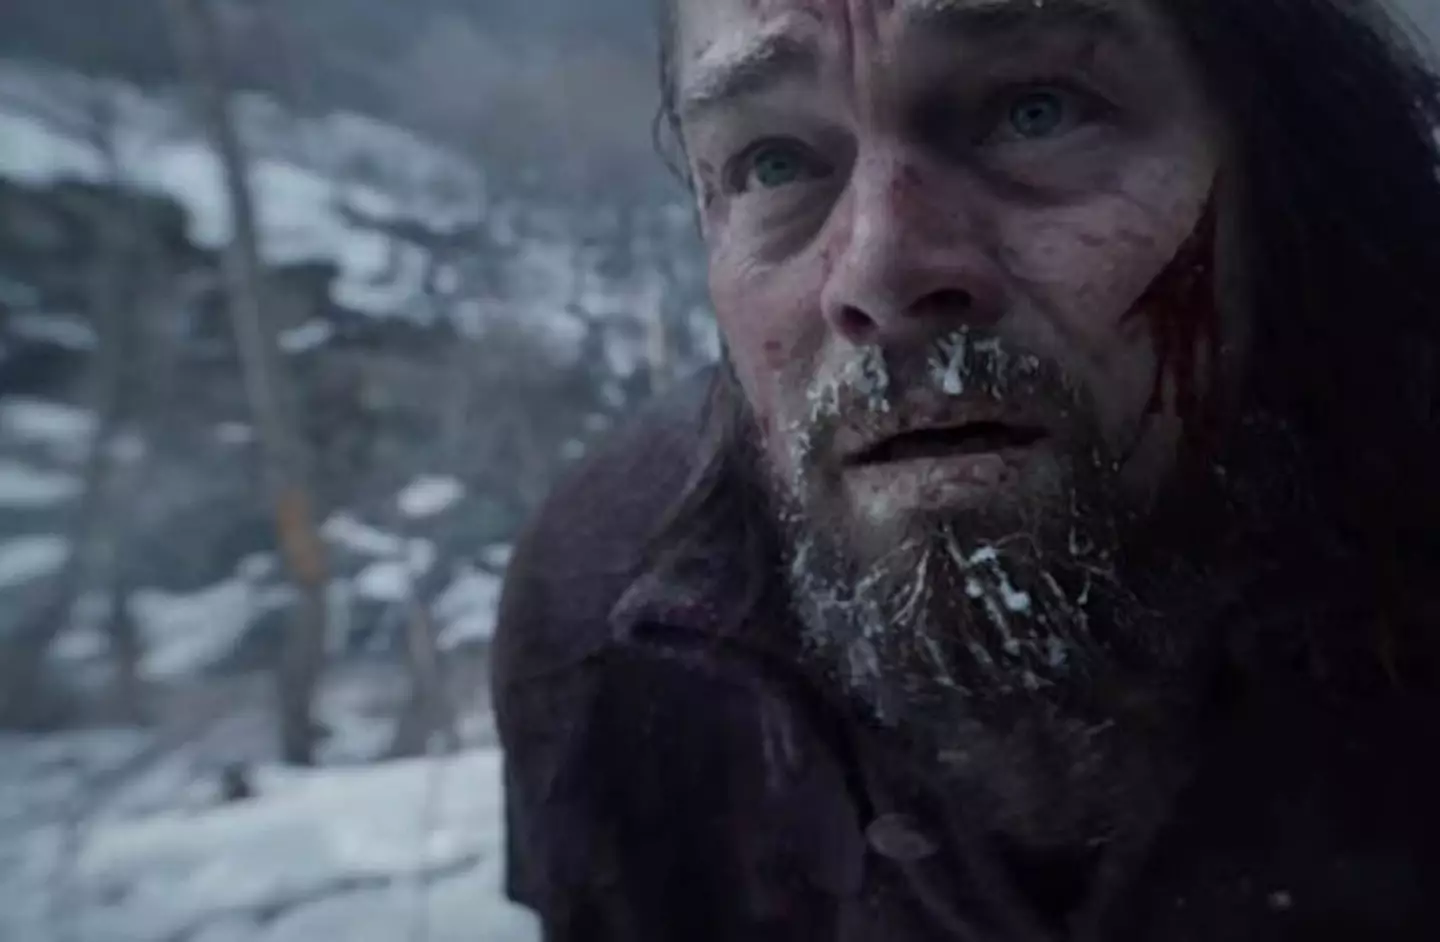 Leonardo DiCaprio won an Academy Award for his role in The Revenant.